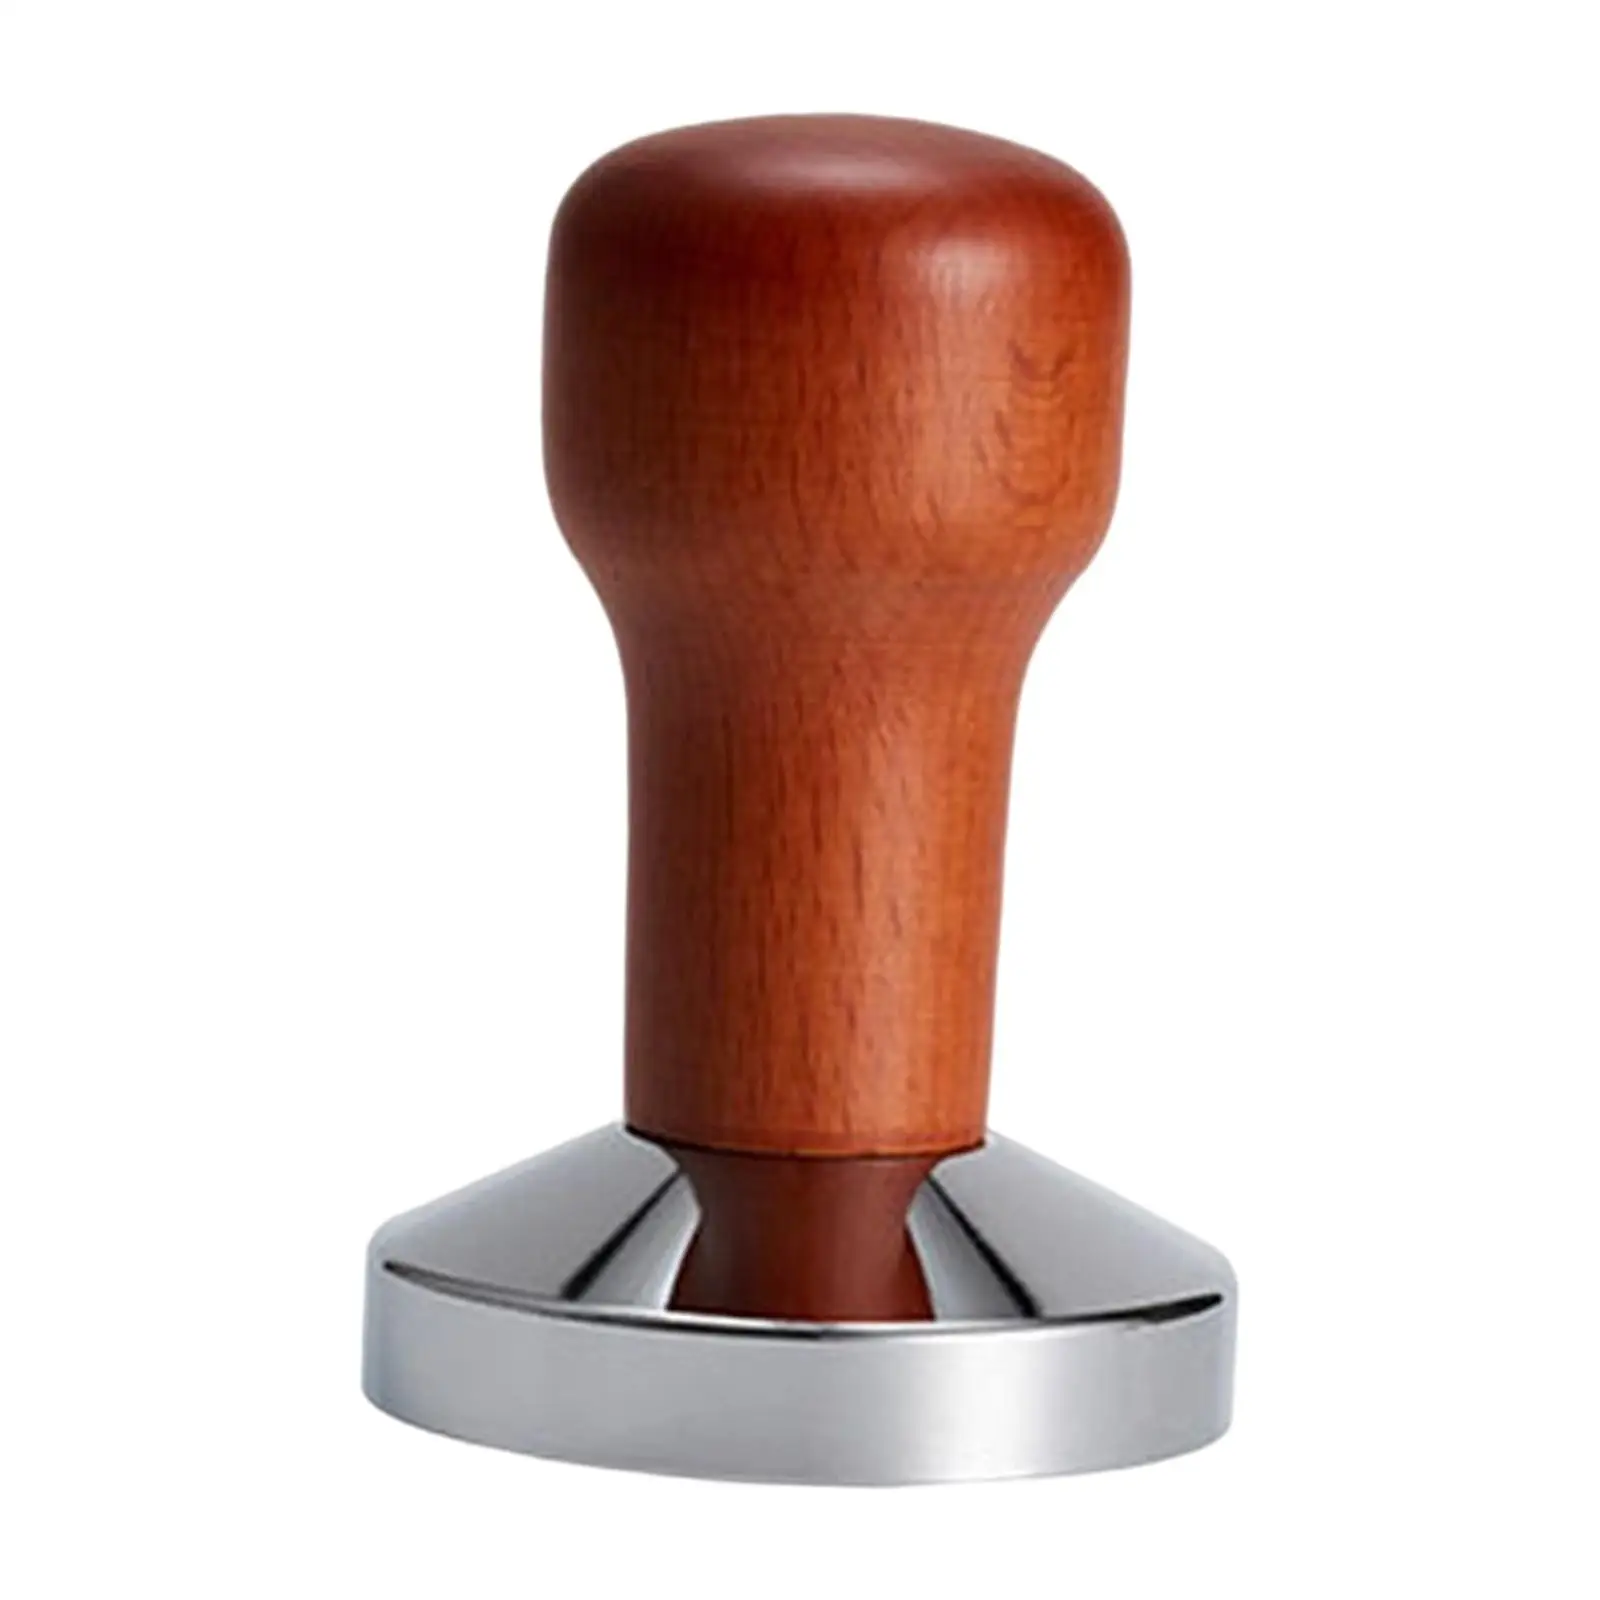 51/53/58mm Coffee Tamper Barista Tool Pressing Loosely Distributed Espresso Tamper for Espresso Machines Accessory Barista